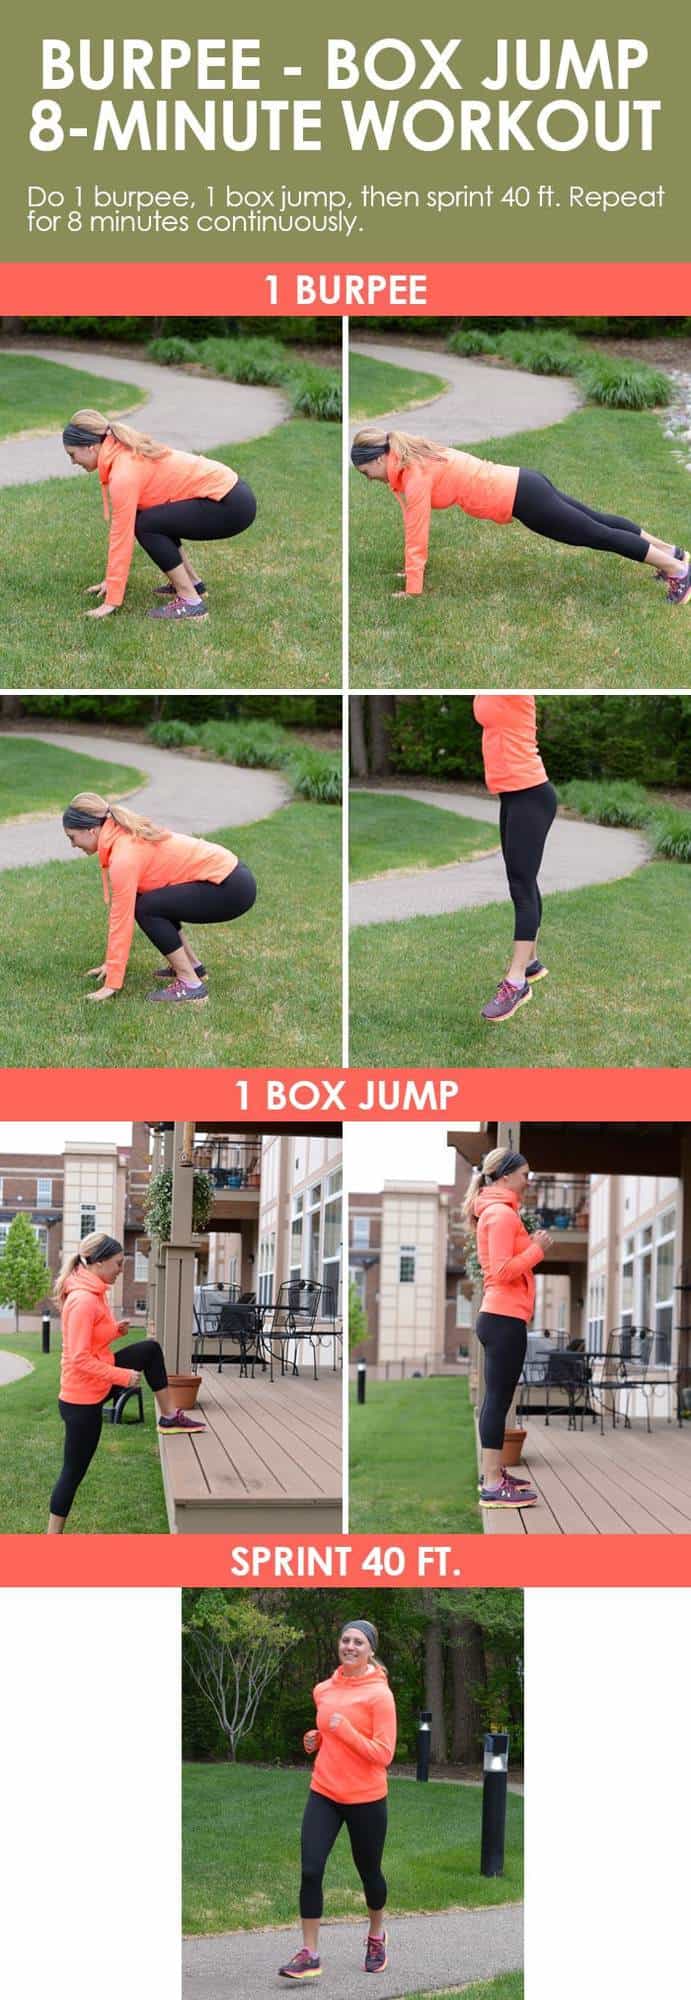 Do this Burpee Box Jump 8-Minute Workout for a challenging, yet quick workout that will get your heart rate up and burn calories! 